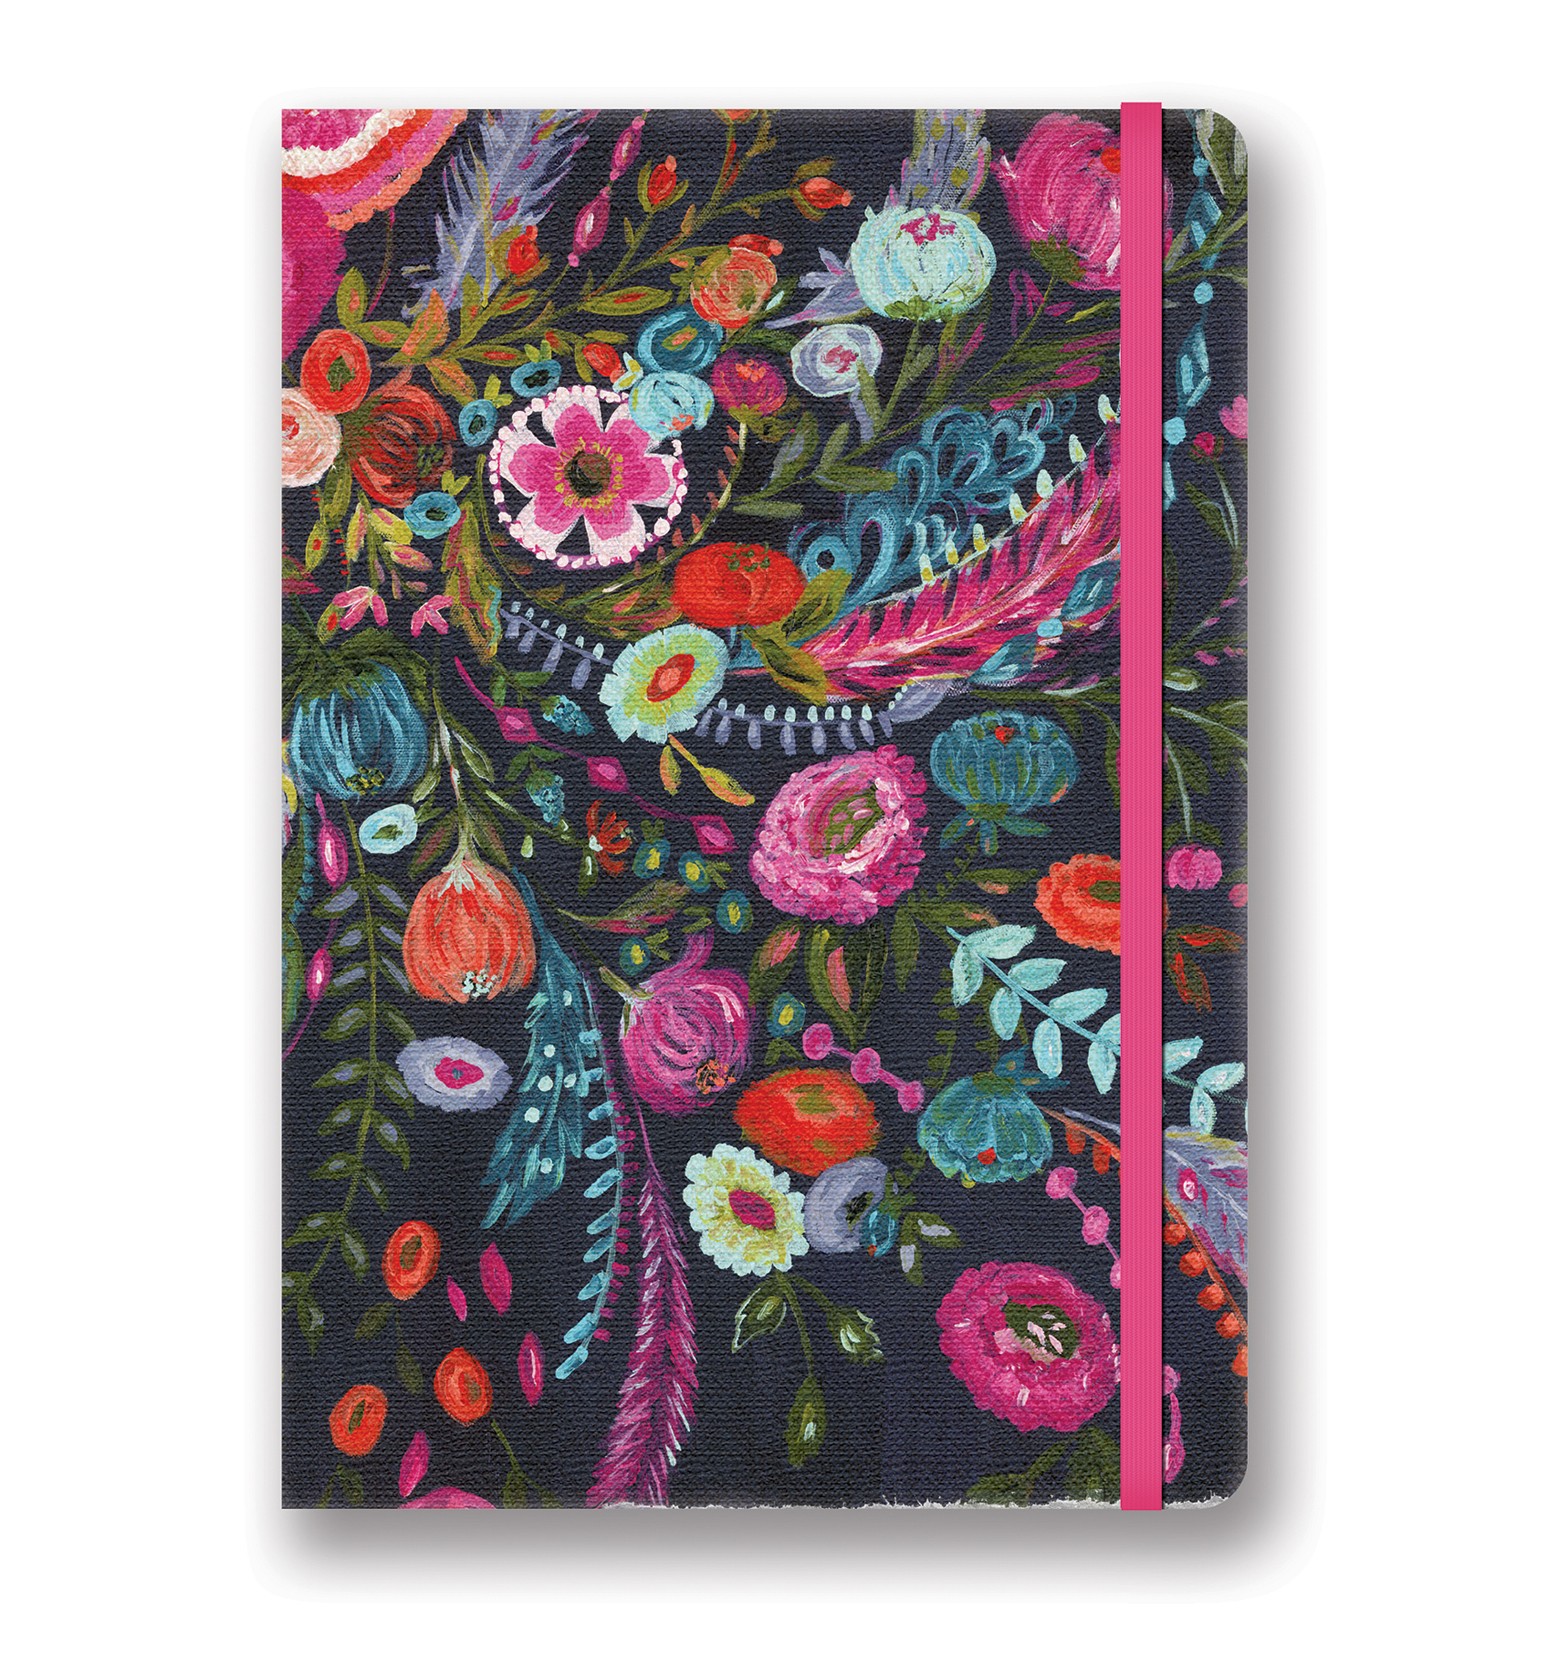 Gypsy Floral Compact Deconstructed Journal